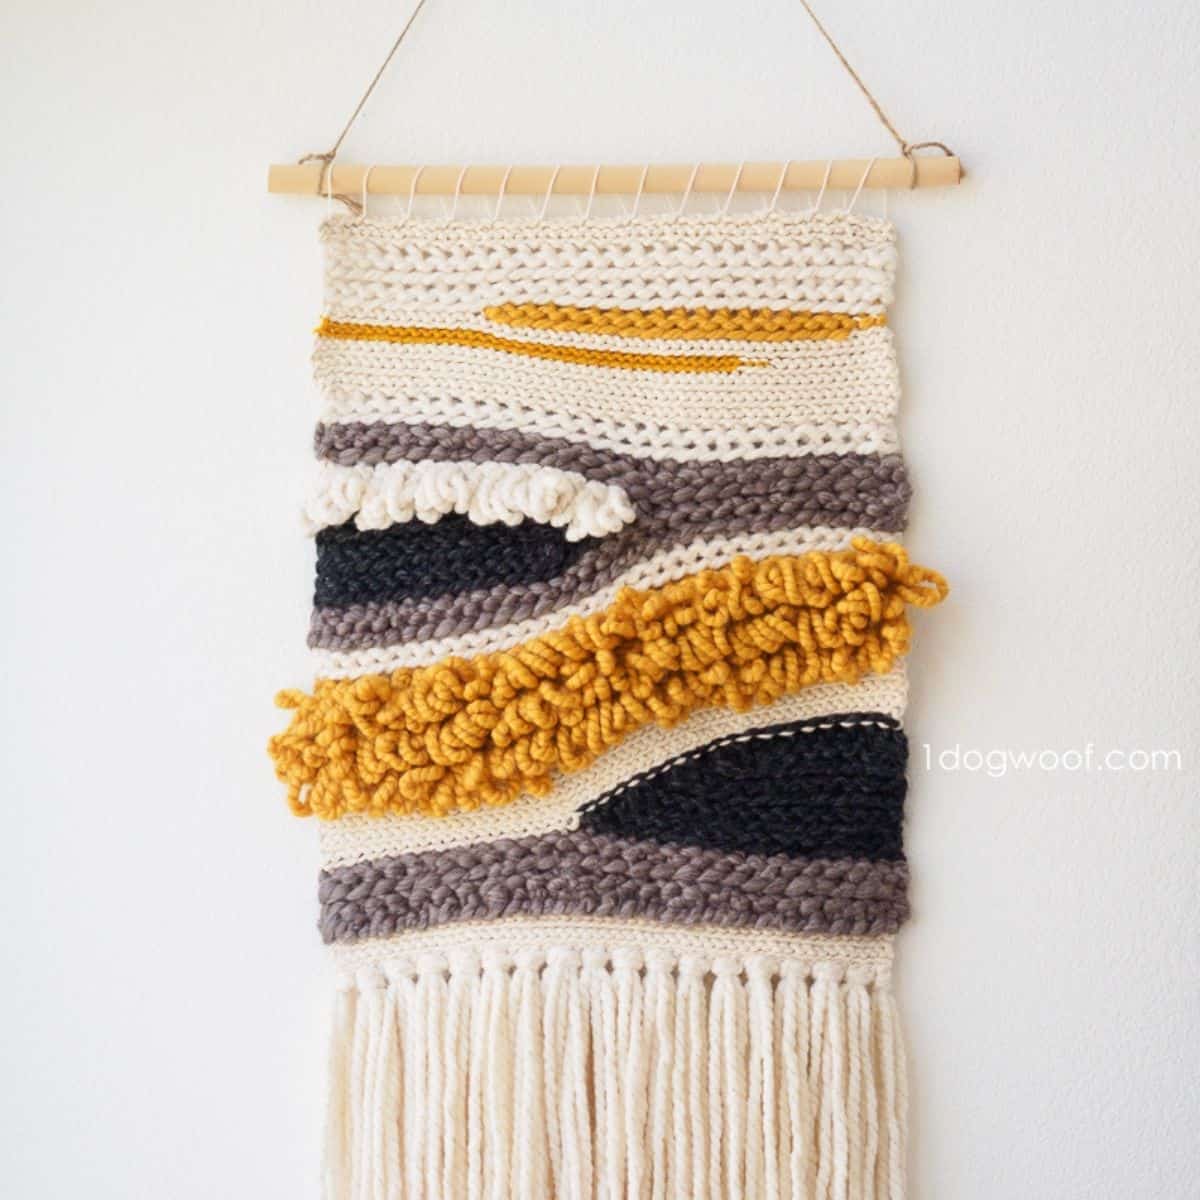 gold, ivory, black, and gray textured crochet wall hanging